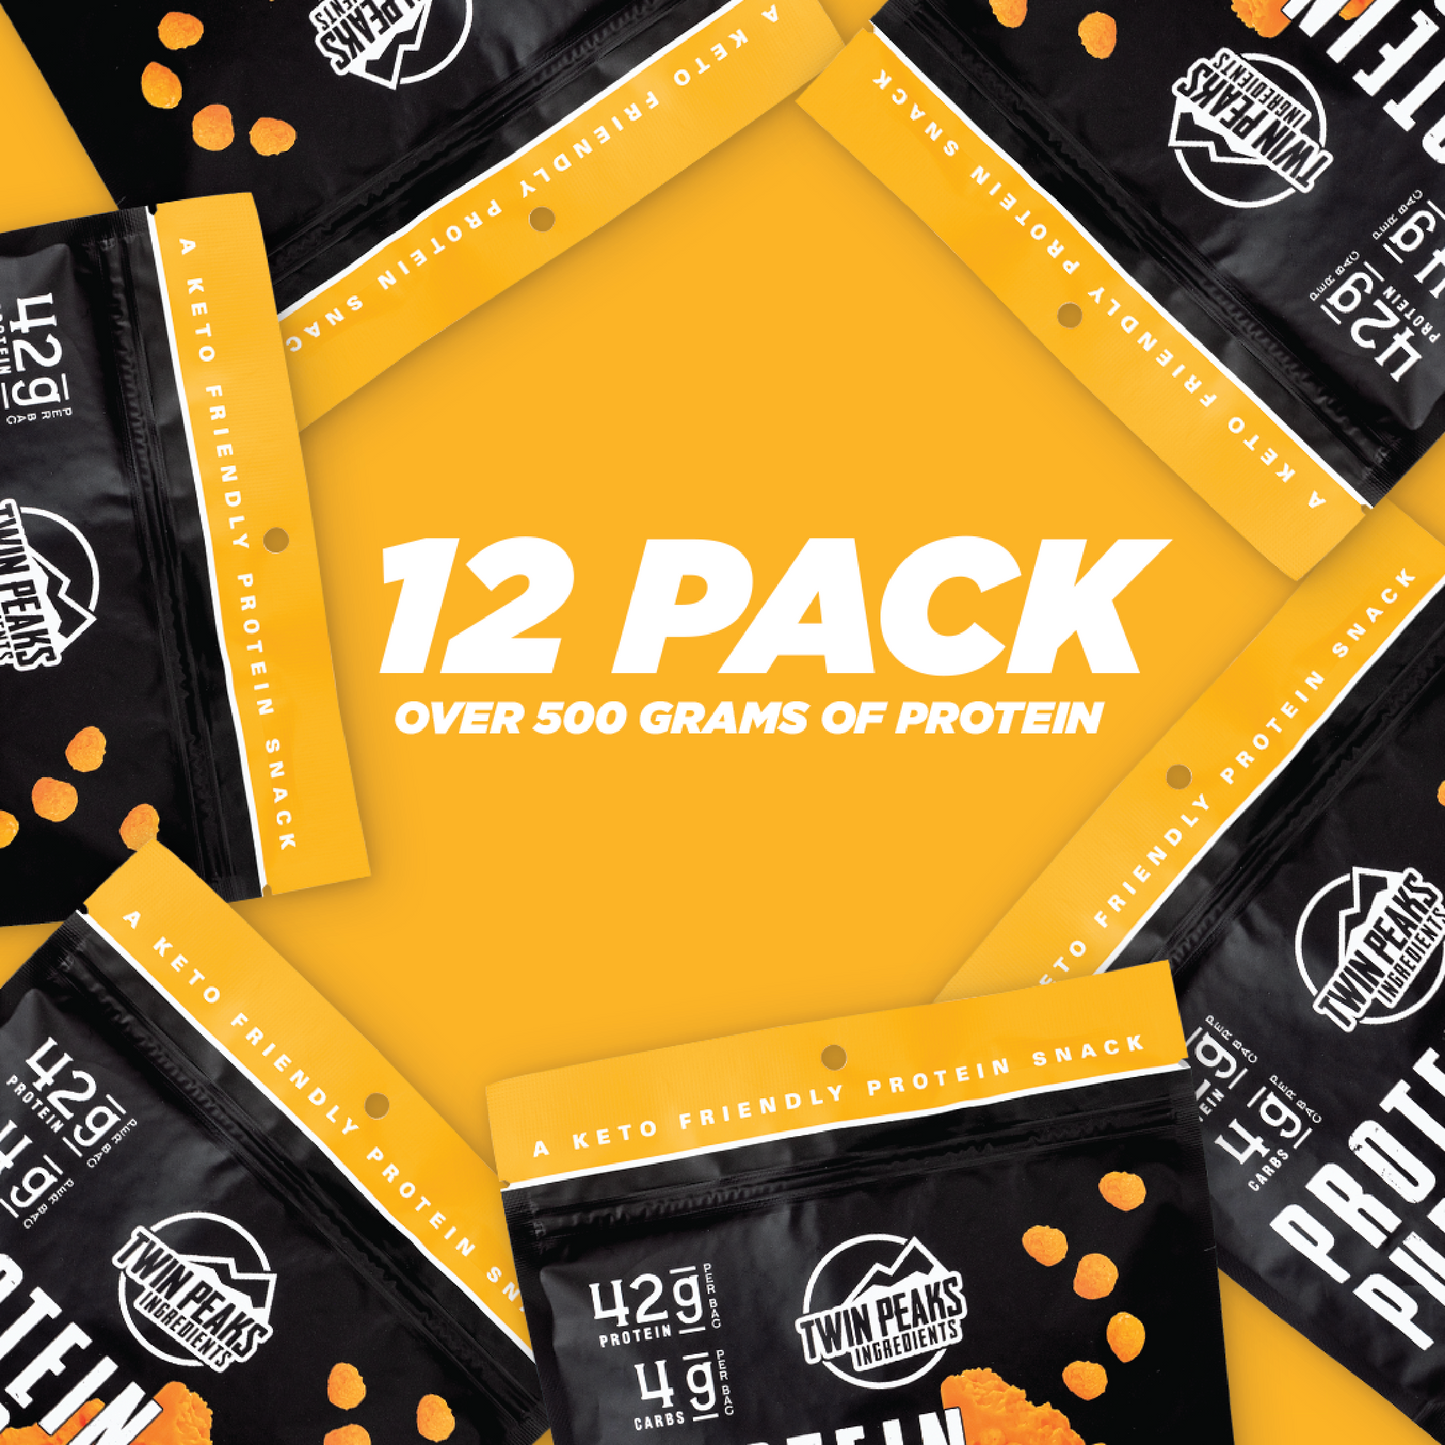 12 Pack - over 500 grams of protein